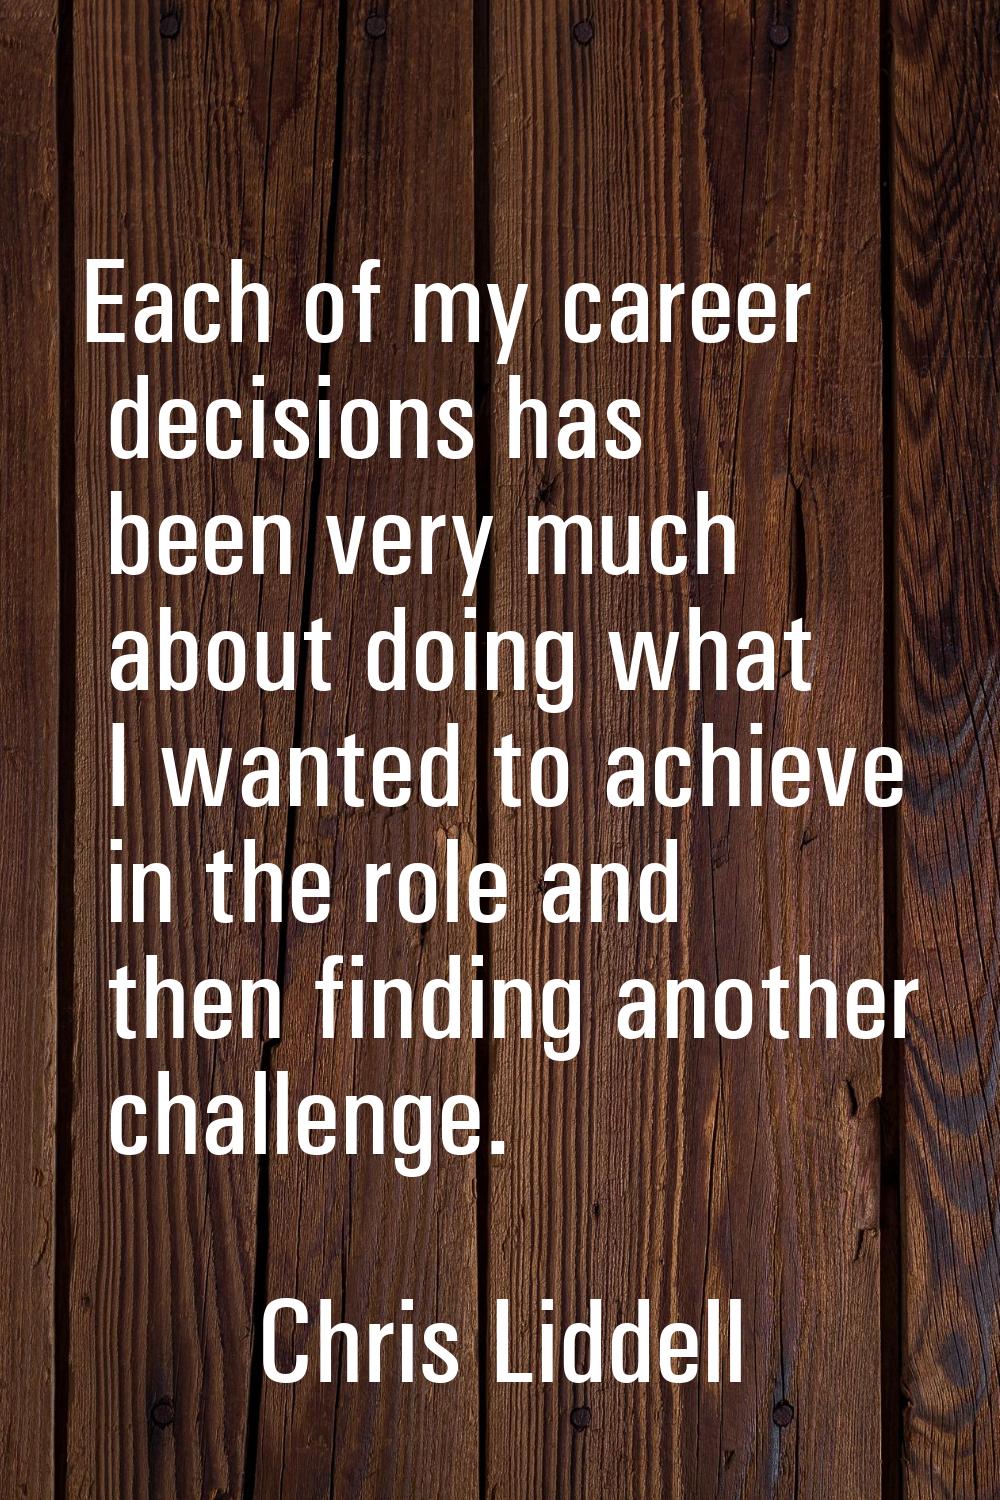 Each of my career decisions has been very much about doing what I wanted to achieve in the role and